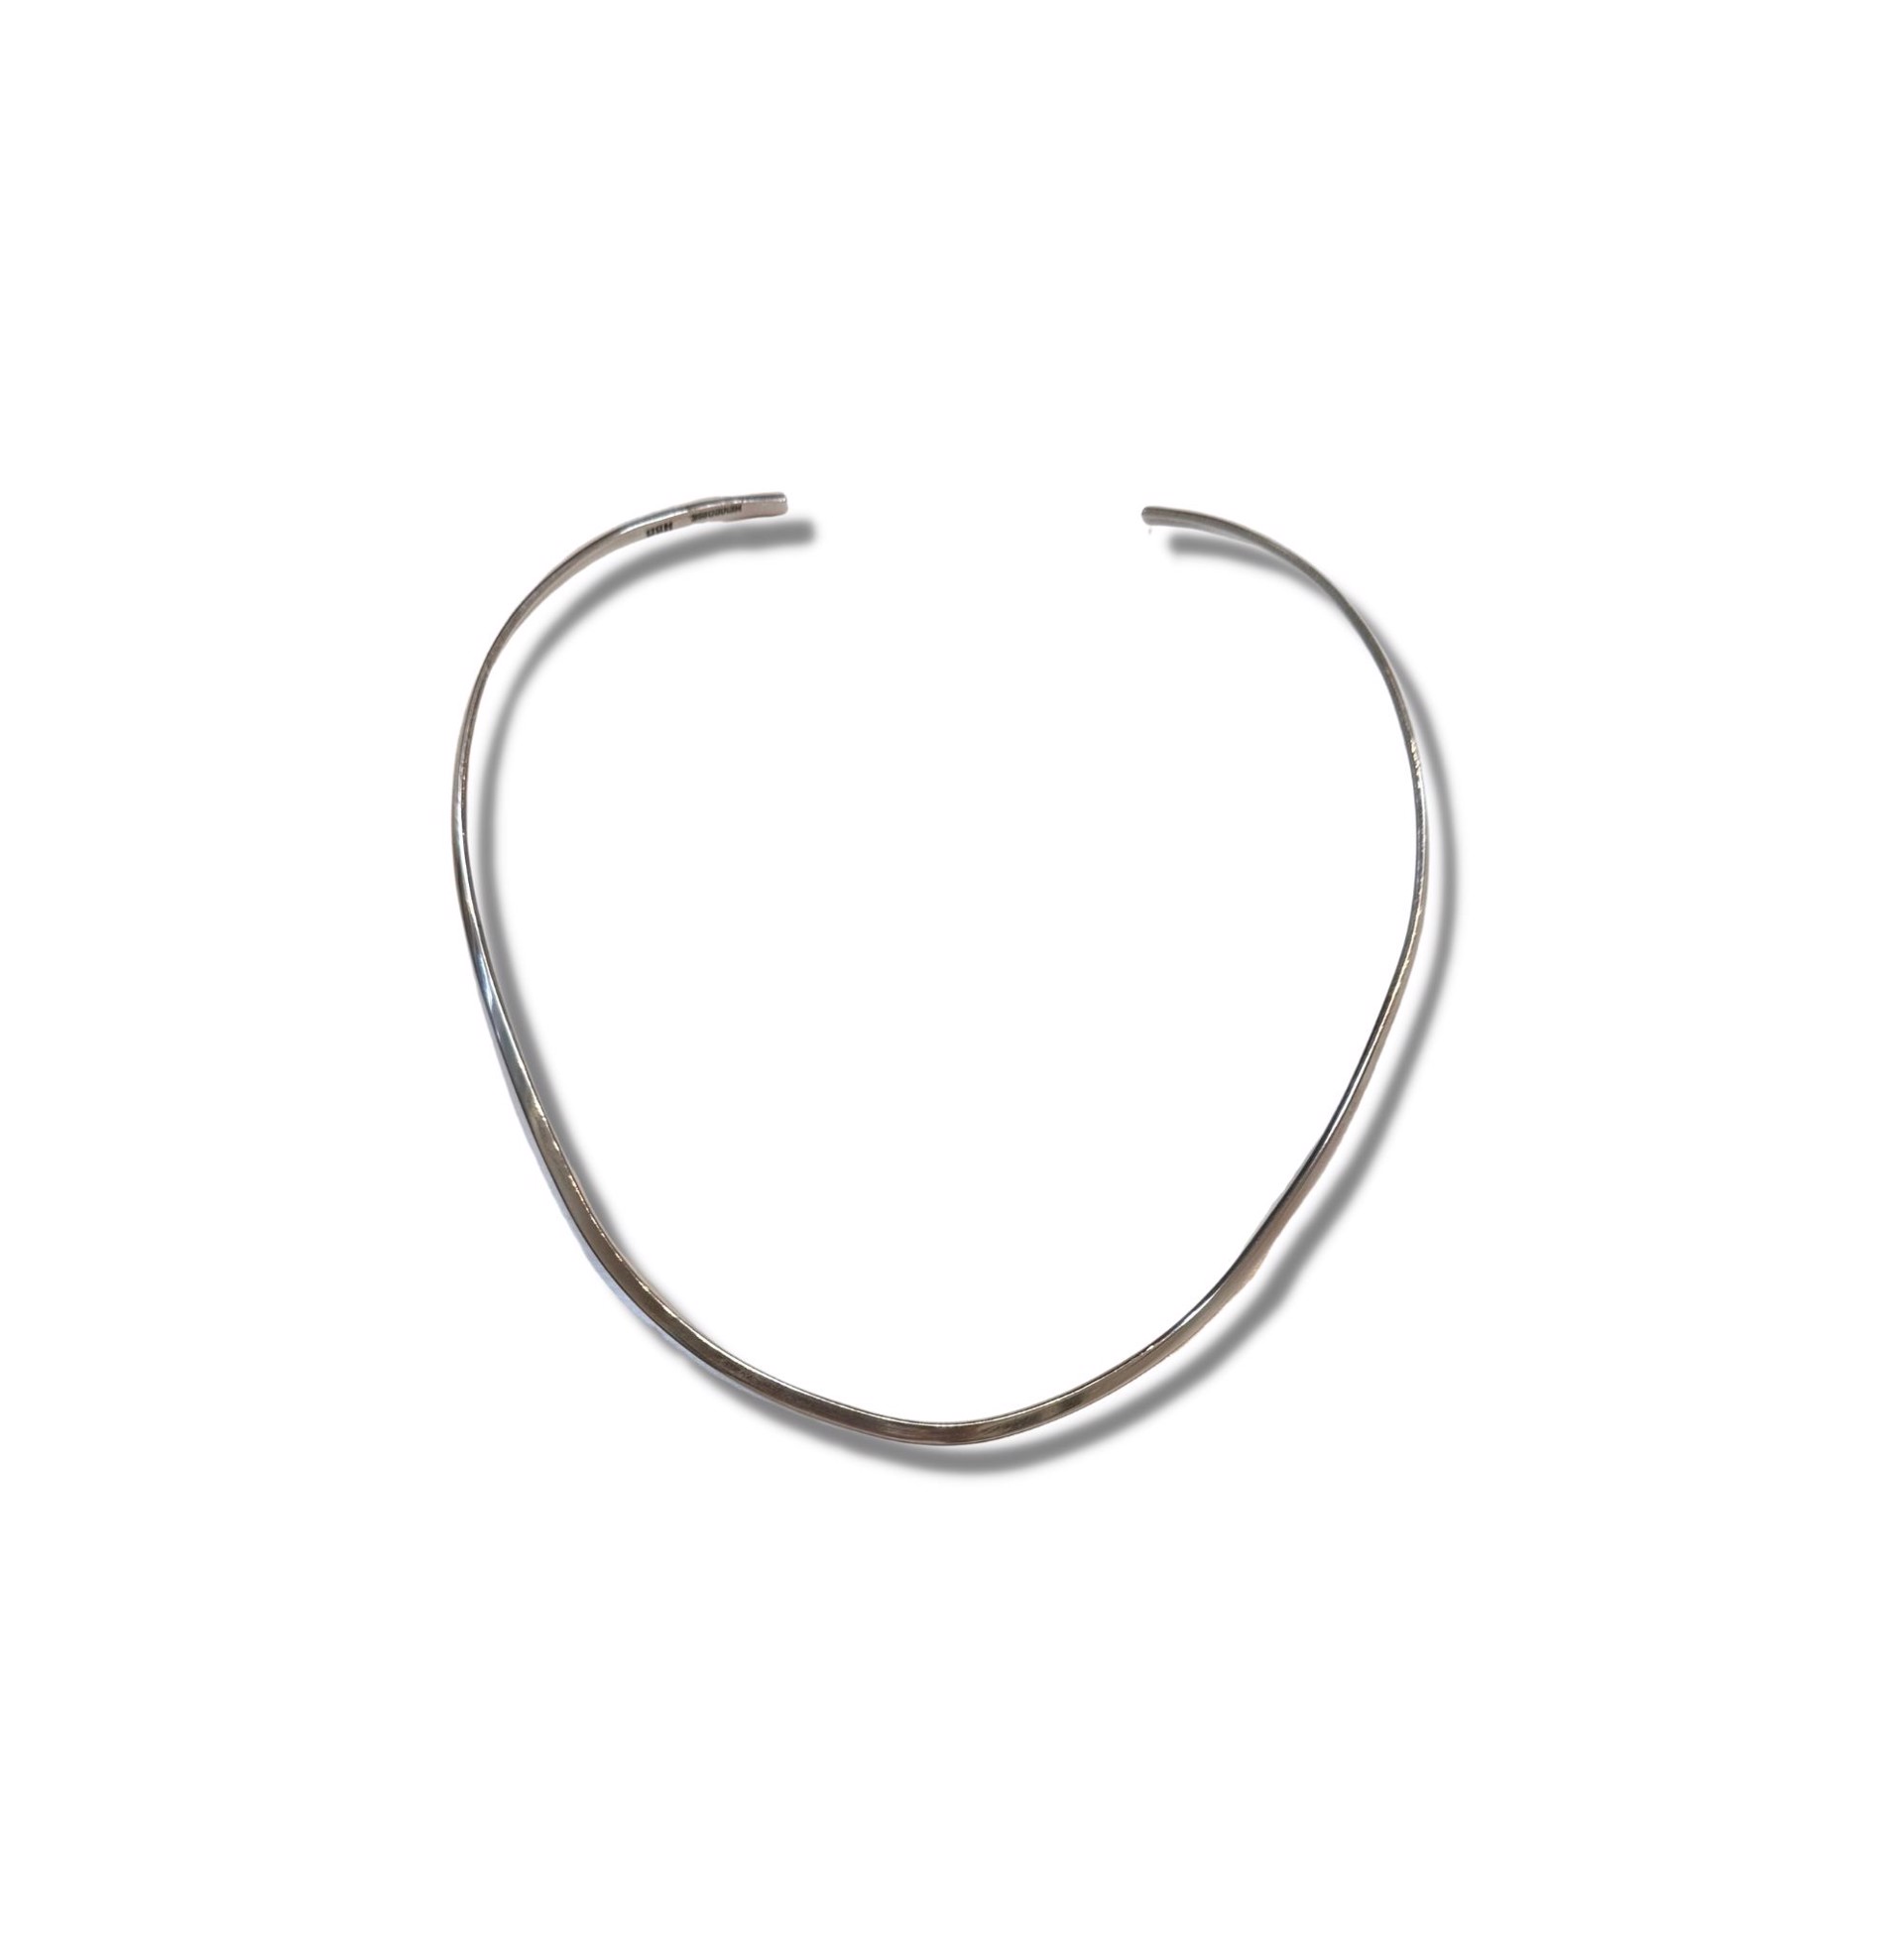 Necklace - Sterling Silver Neck Ring by Kai Cook